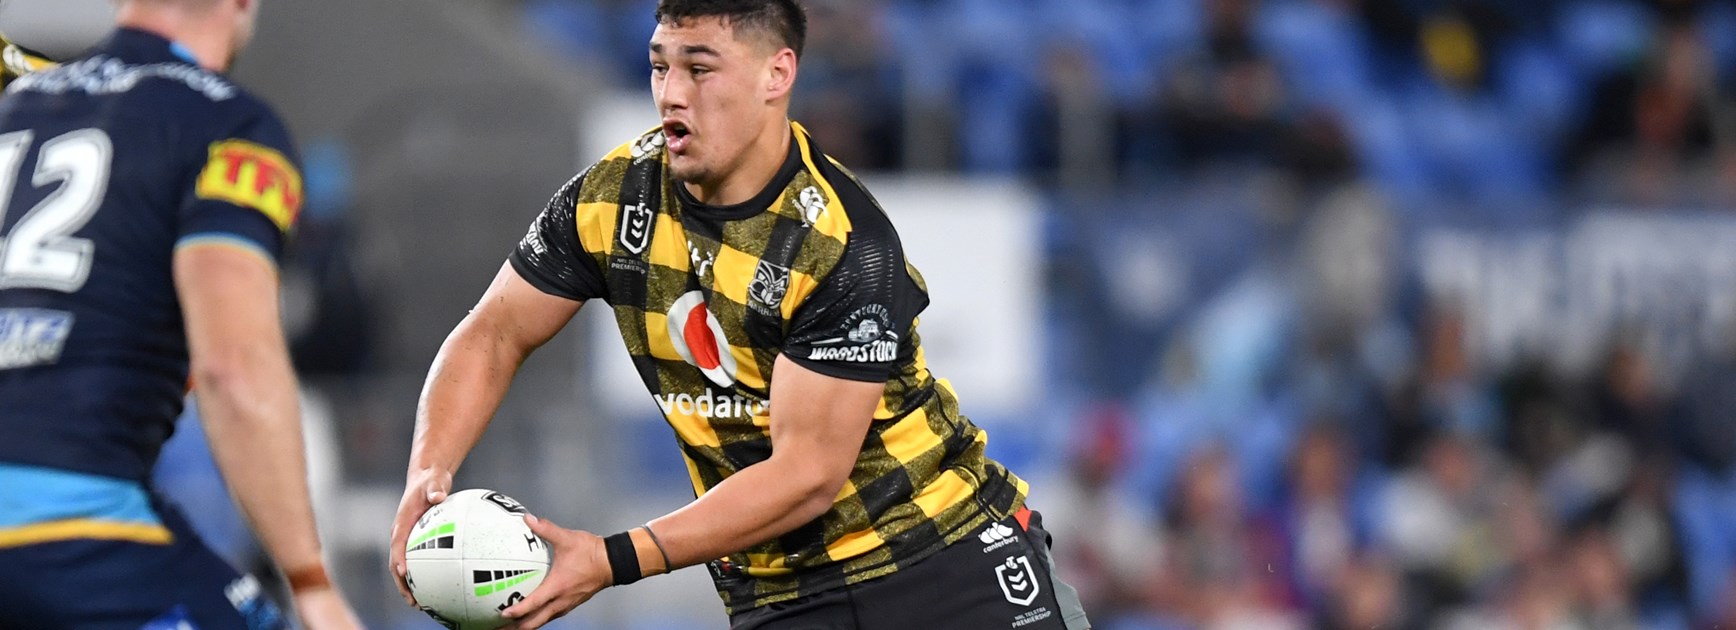 2020 Signings Tracker: Roberts exits Souths; Dogs nab Averillo